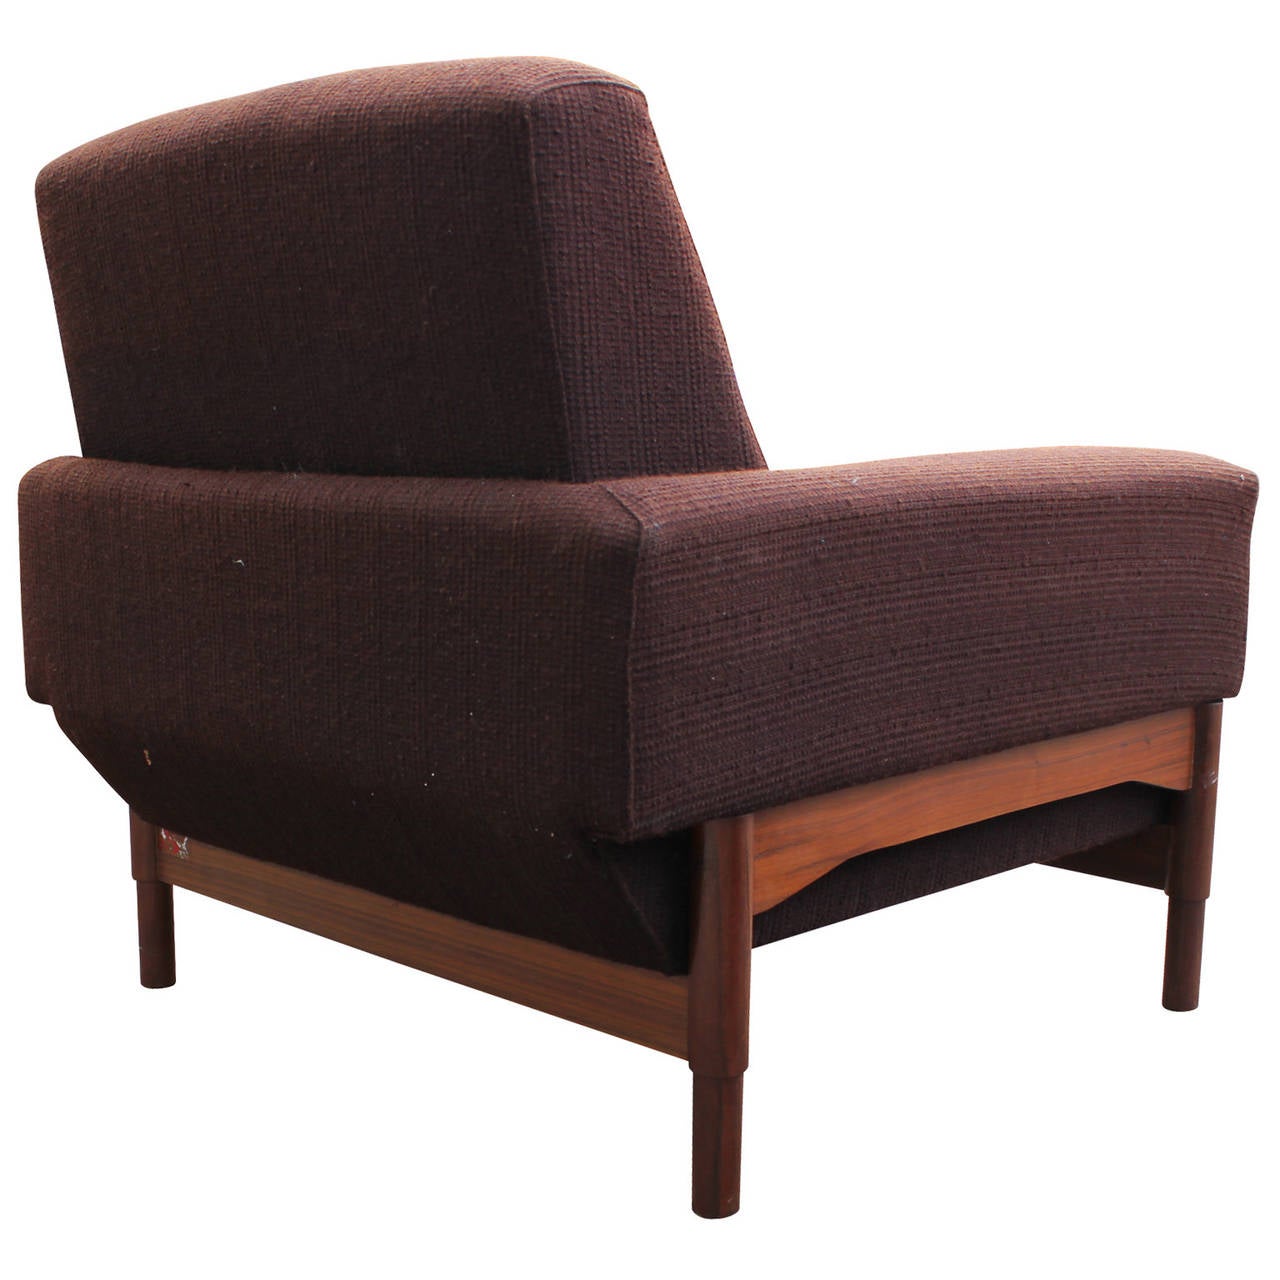 Mid-20th Century Great Pair of Mid-Century Modern Sculptural Saporiti Lounge Chairs